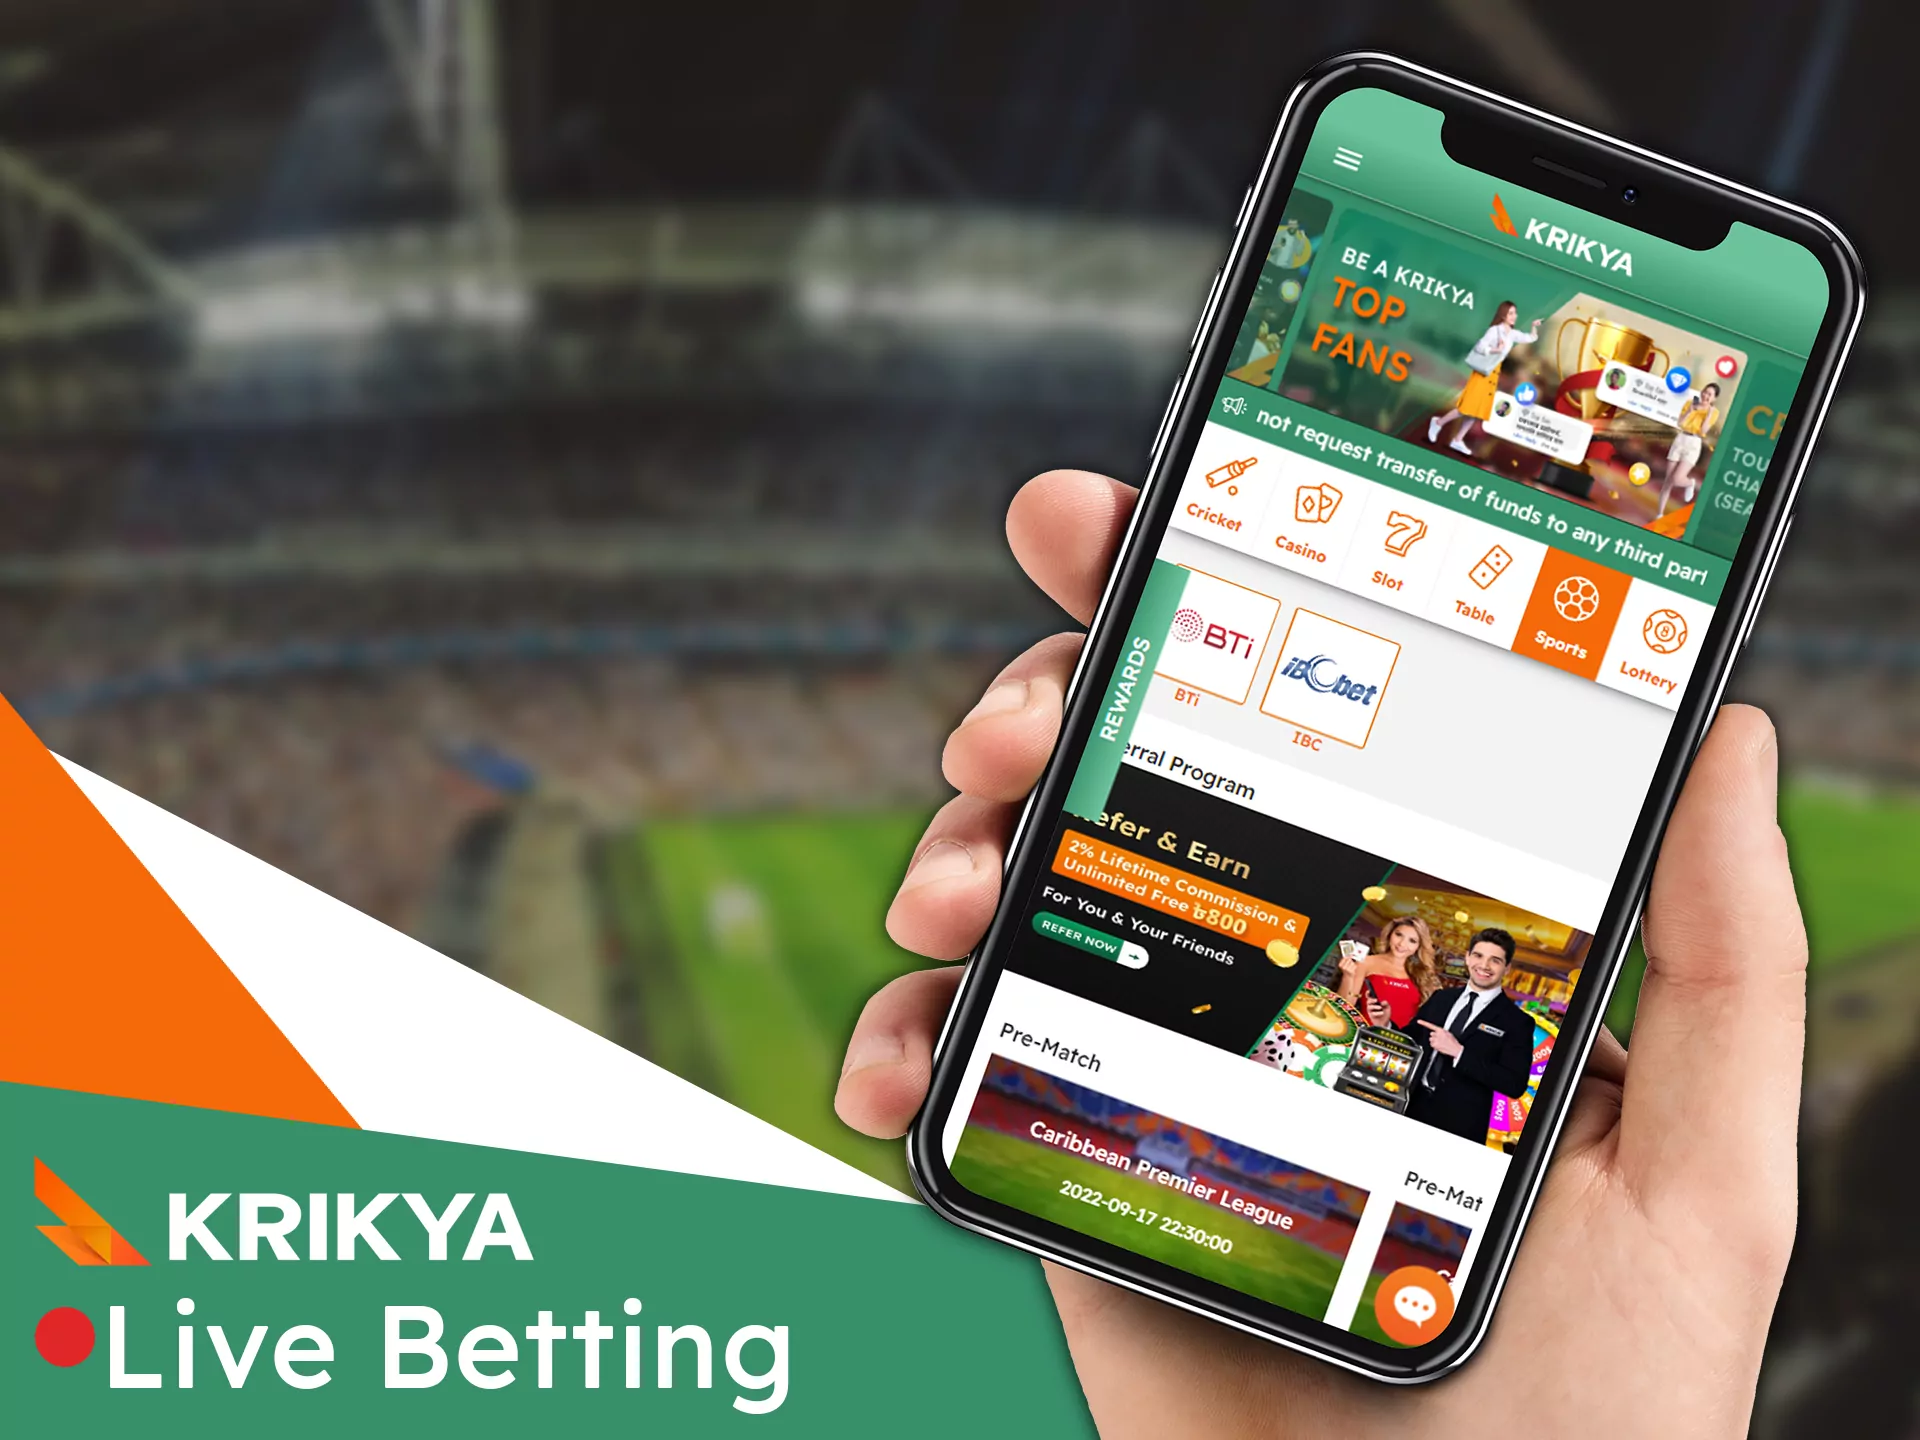 Bet on sports matches in live format at Krikya.